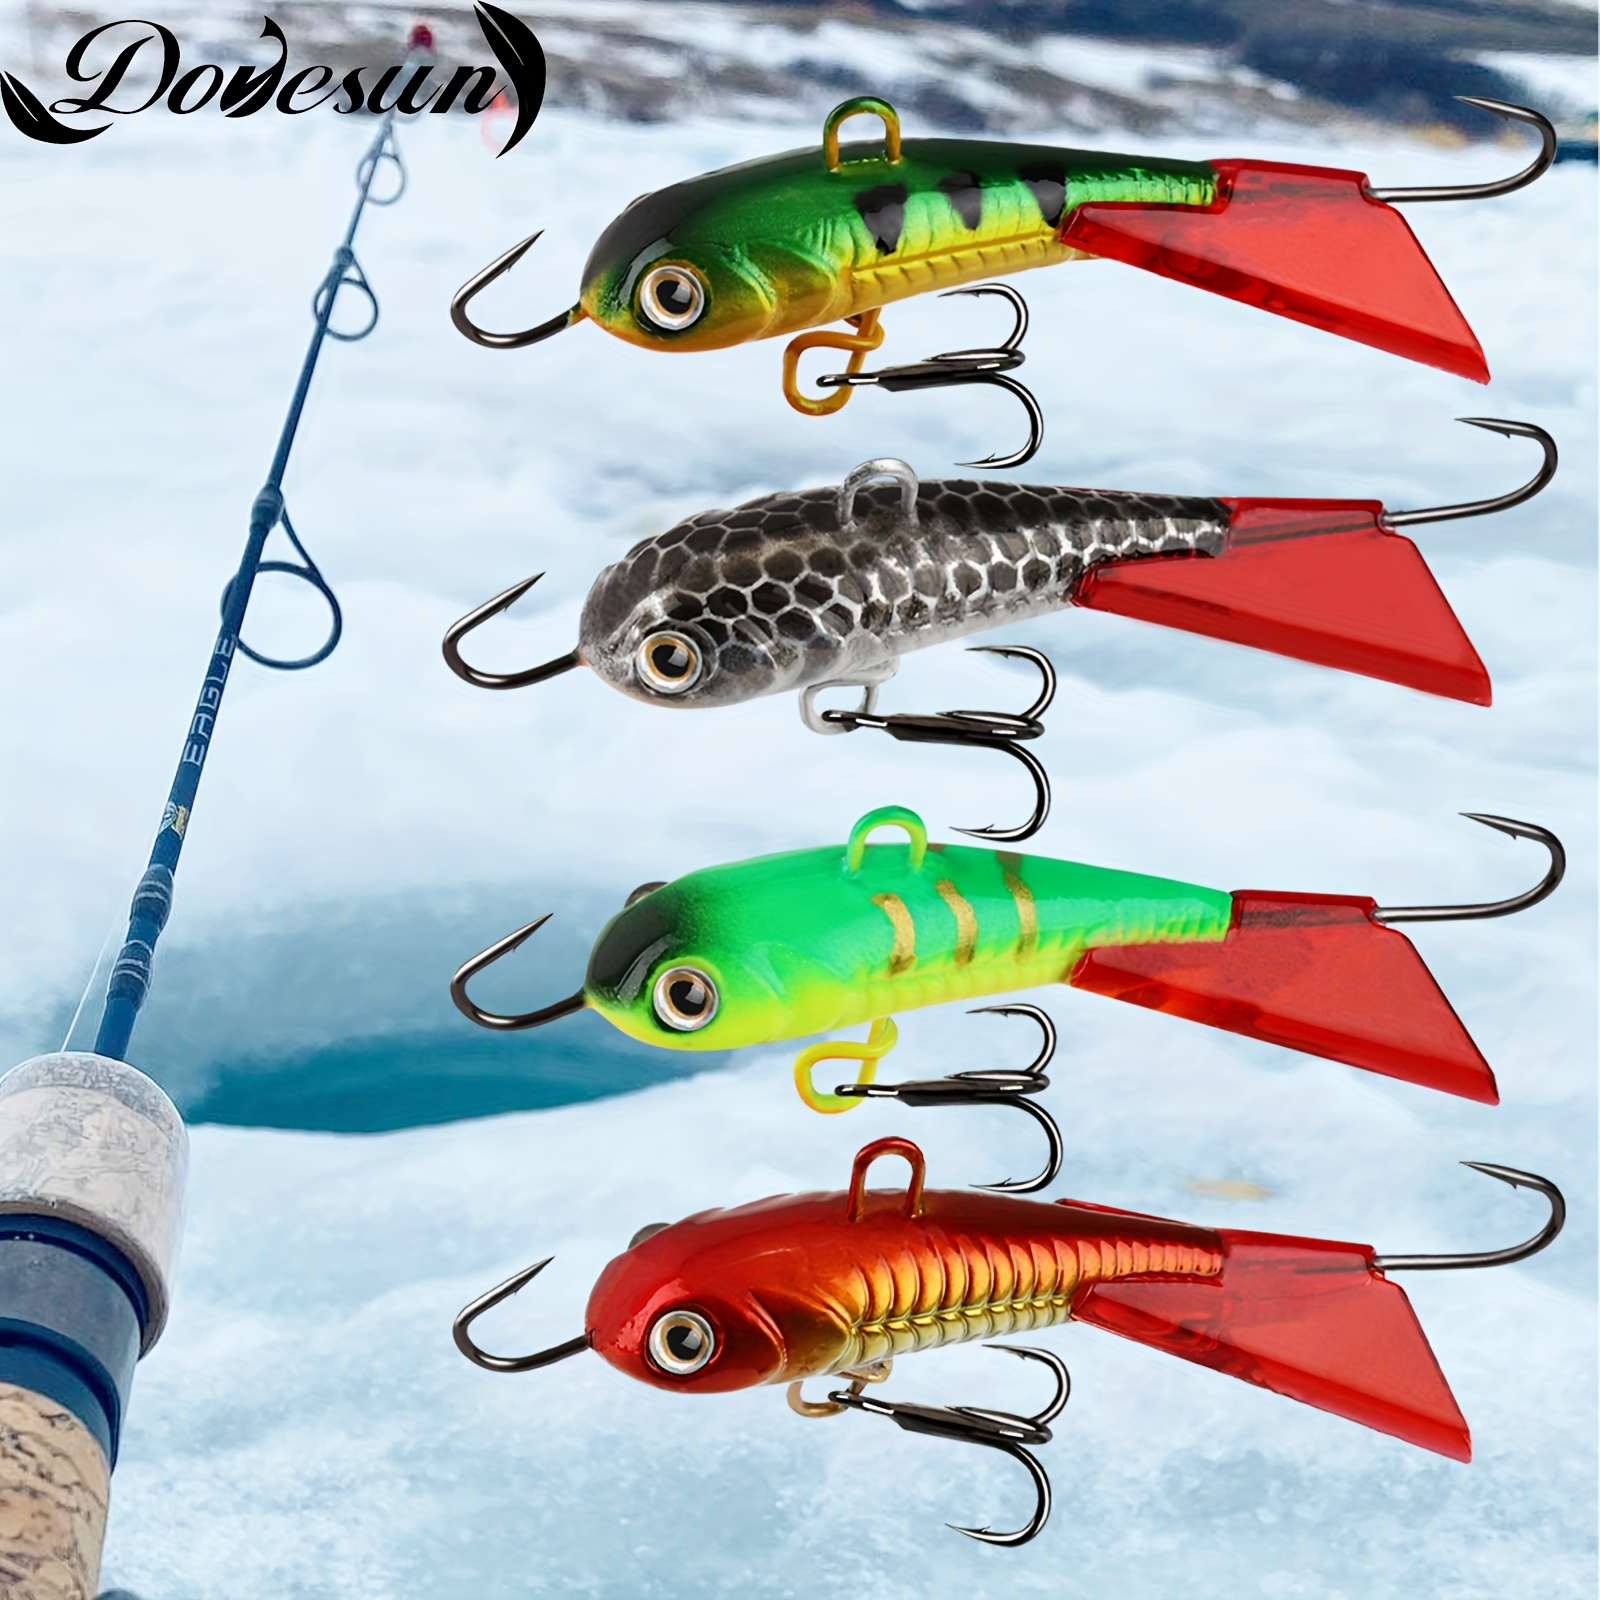 Fishing Lures From TEMU? Realistic Fishing Lure Review (Not Sponsored) 